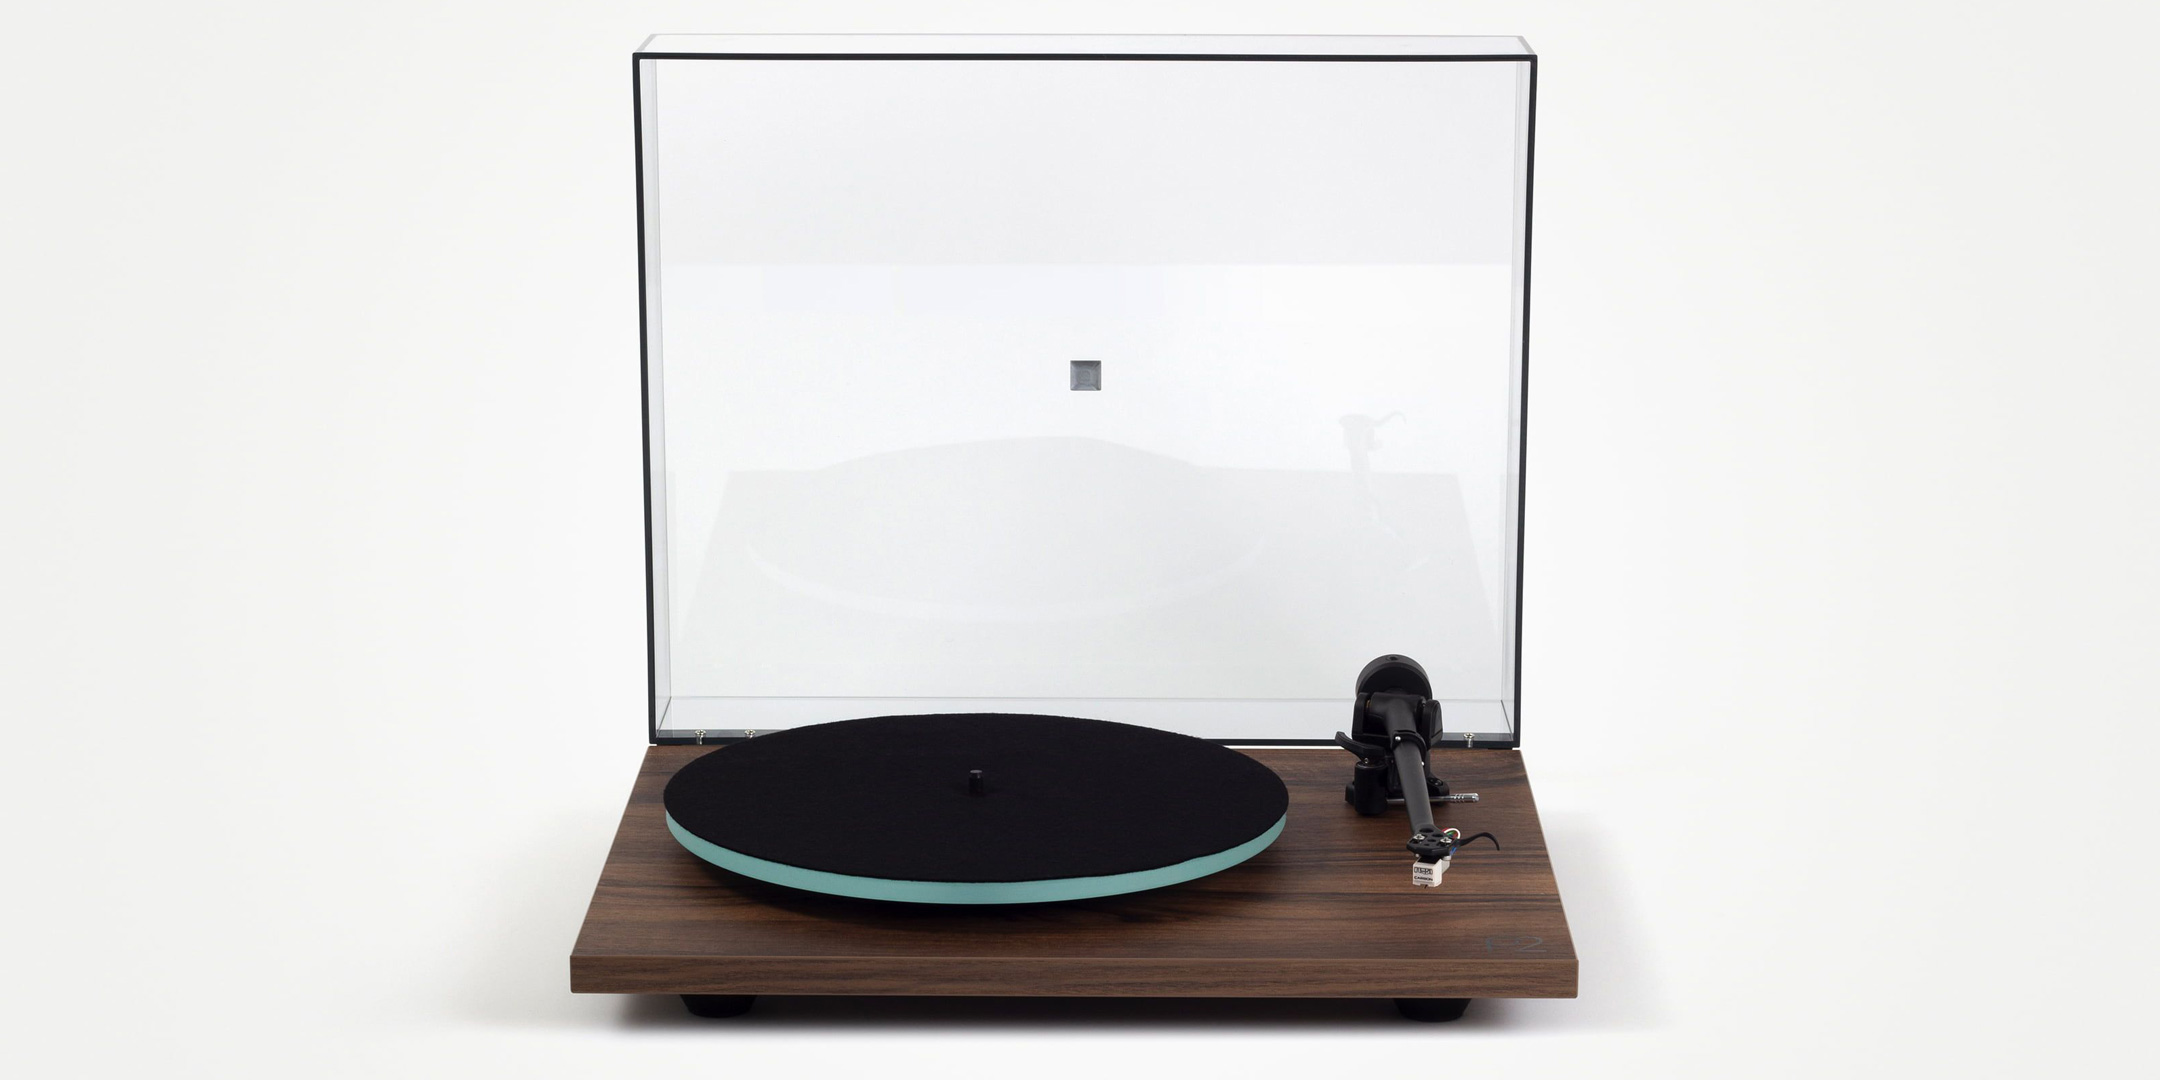 Pic showing a Walnut Rega Planar 2 Turntable with lid up from the front on a white background